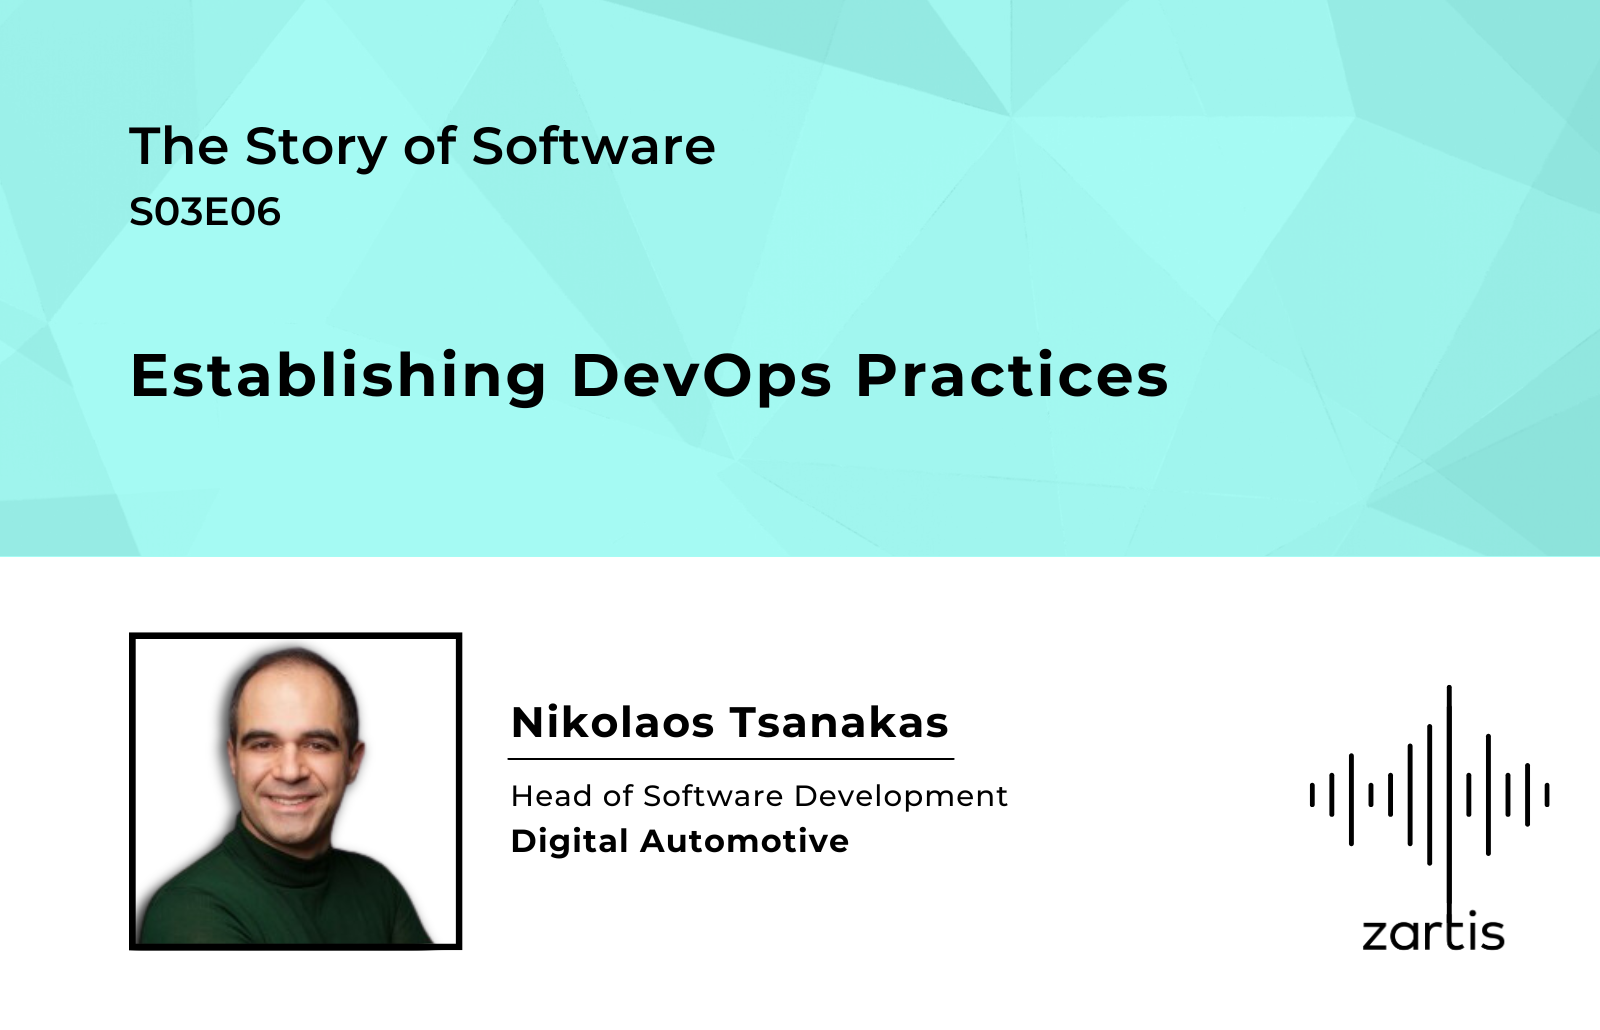 devops practices and services